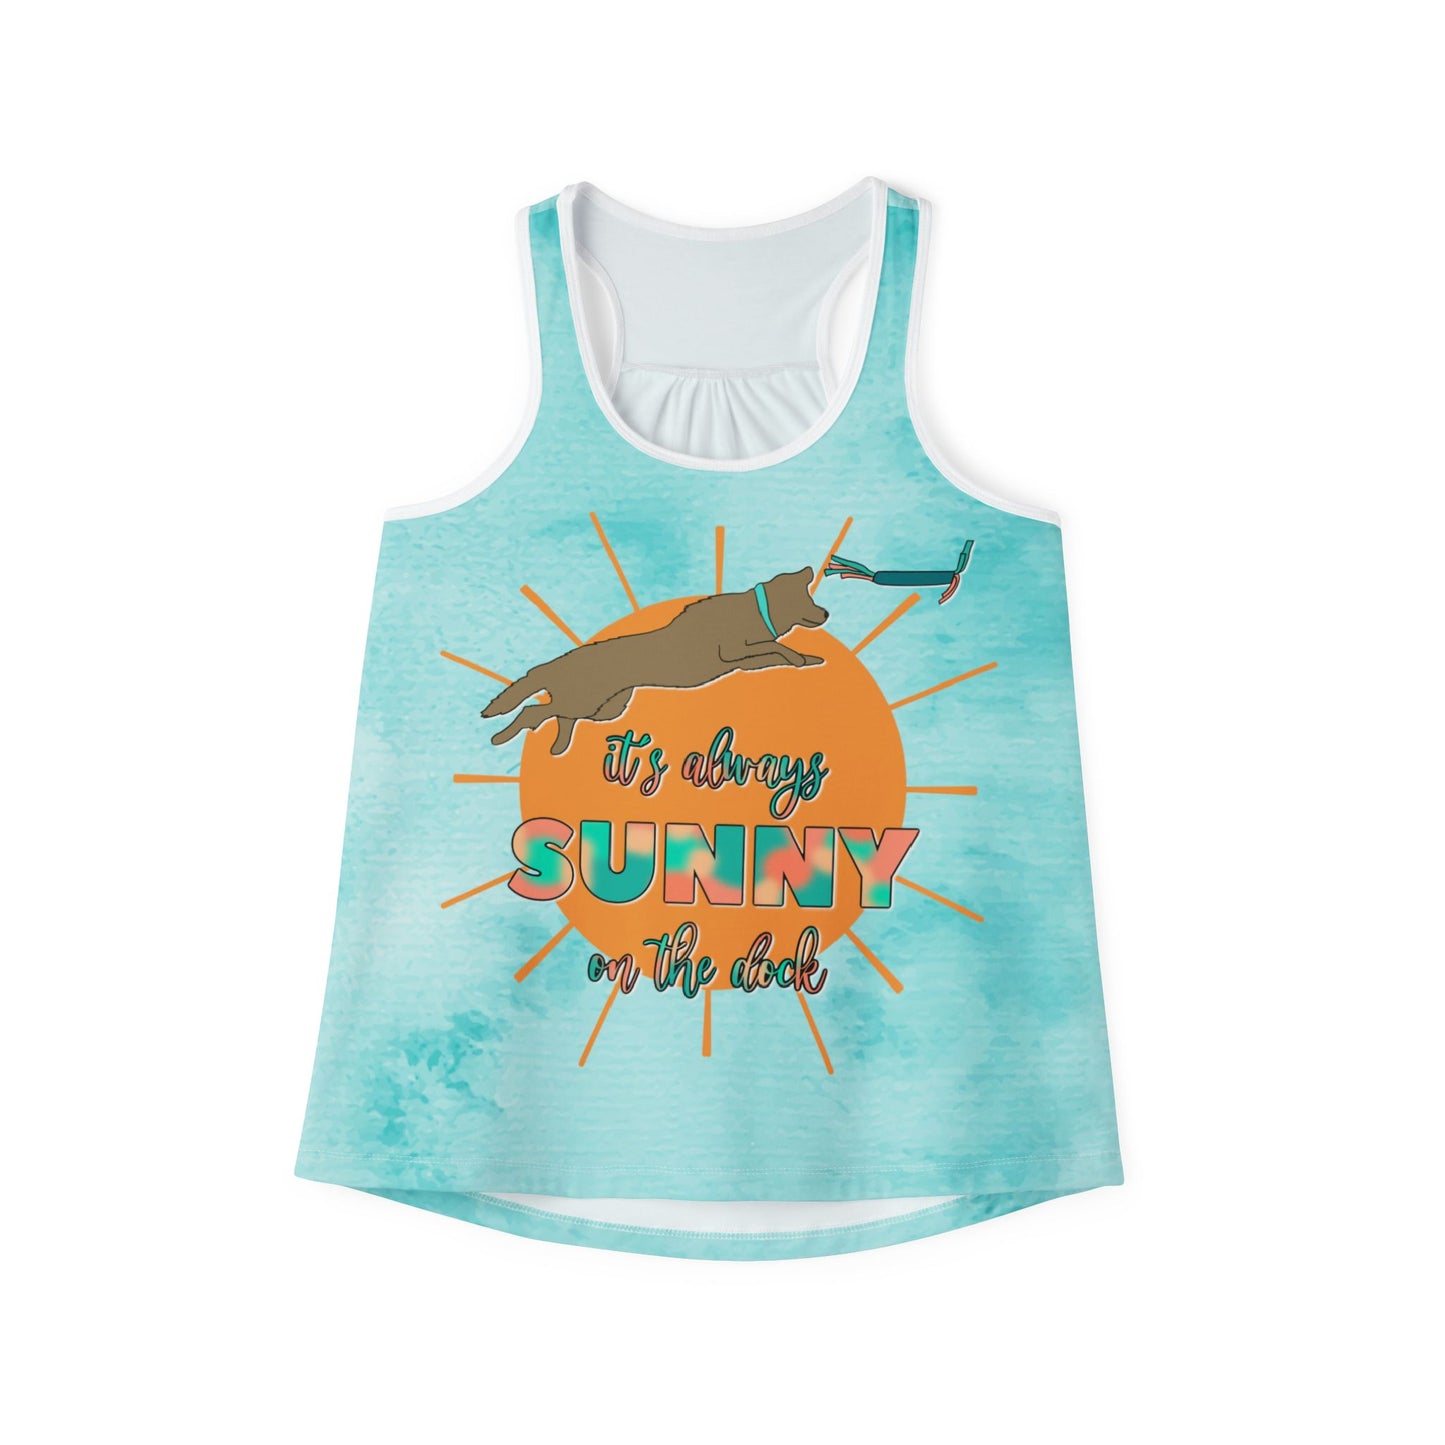 SUNNY (ALL OVER)Women's Tank Top